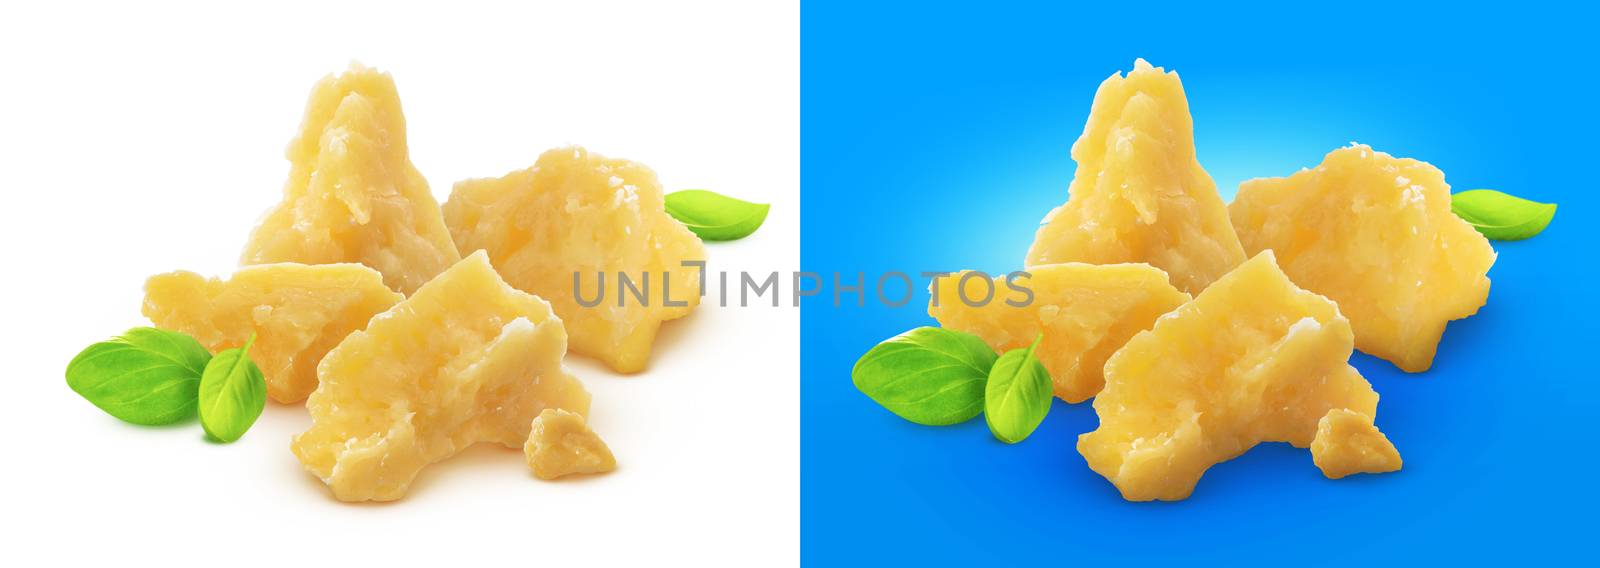 Parmesan isolated on white background with clipping path by xamtiw